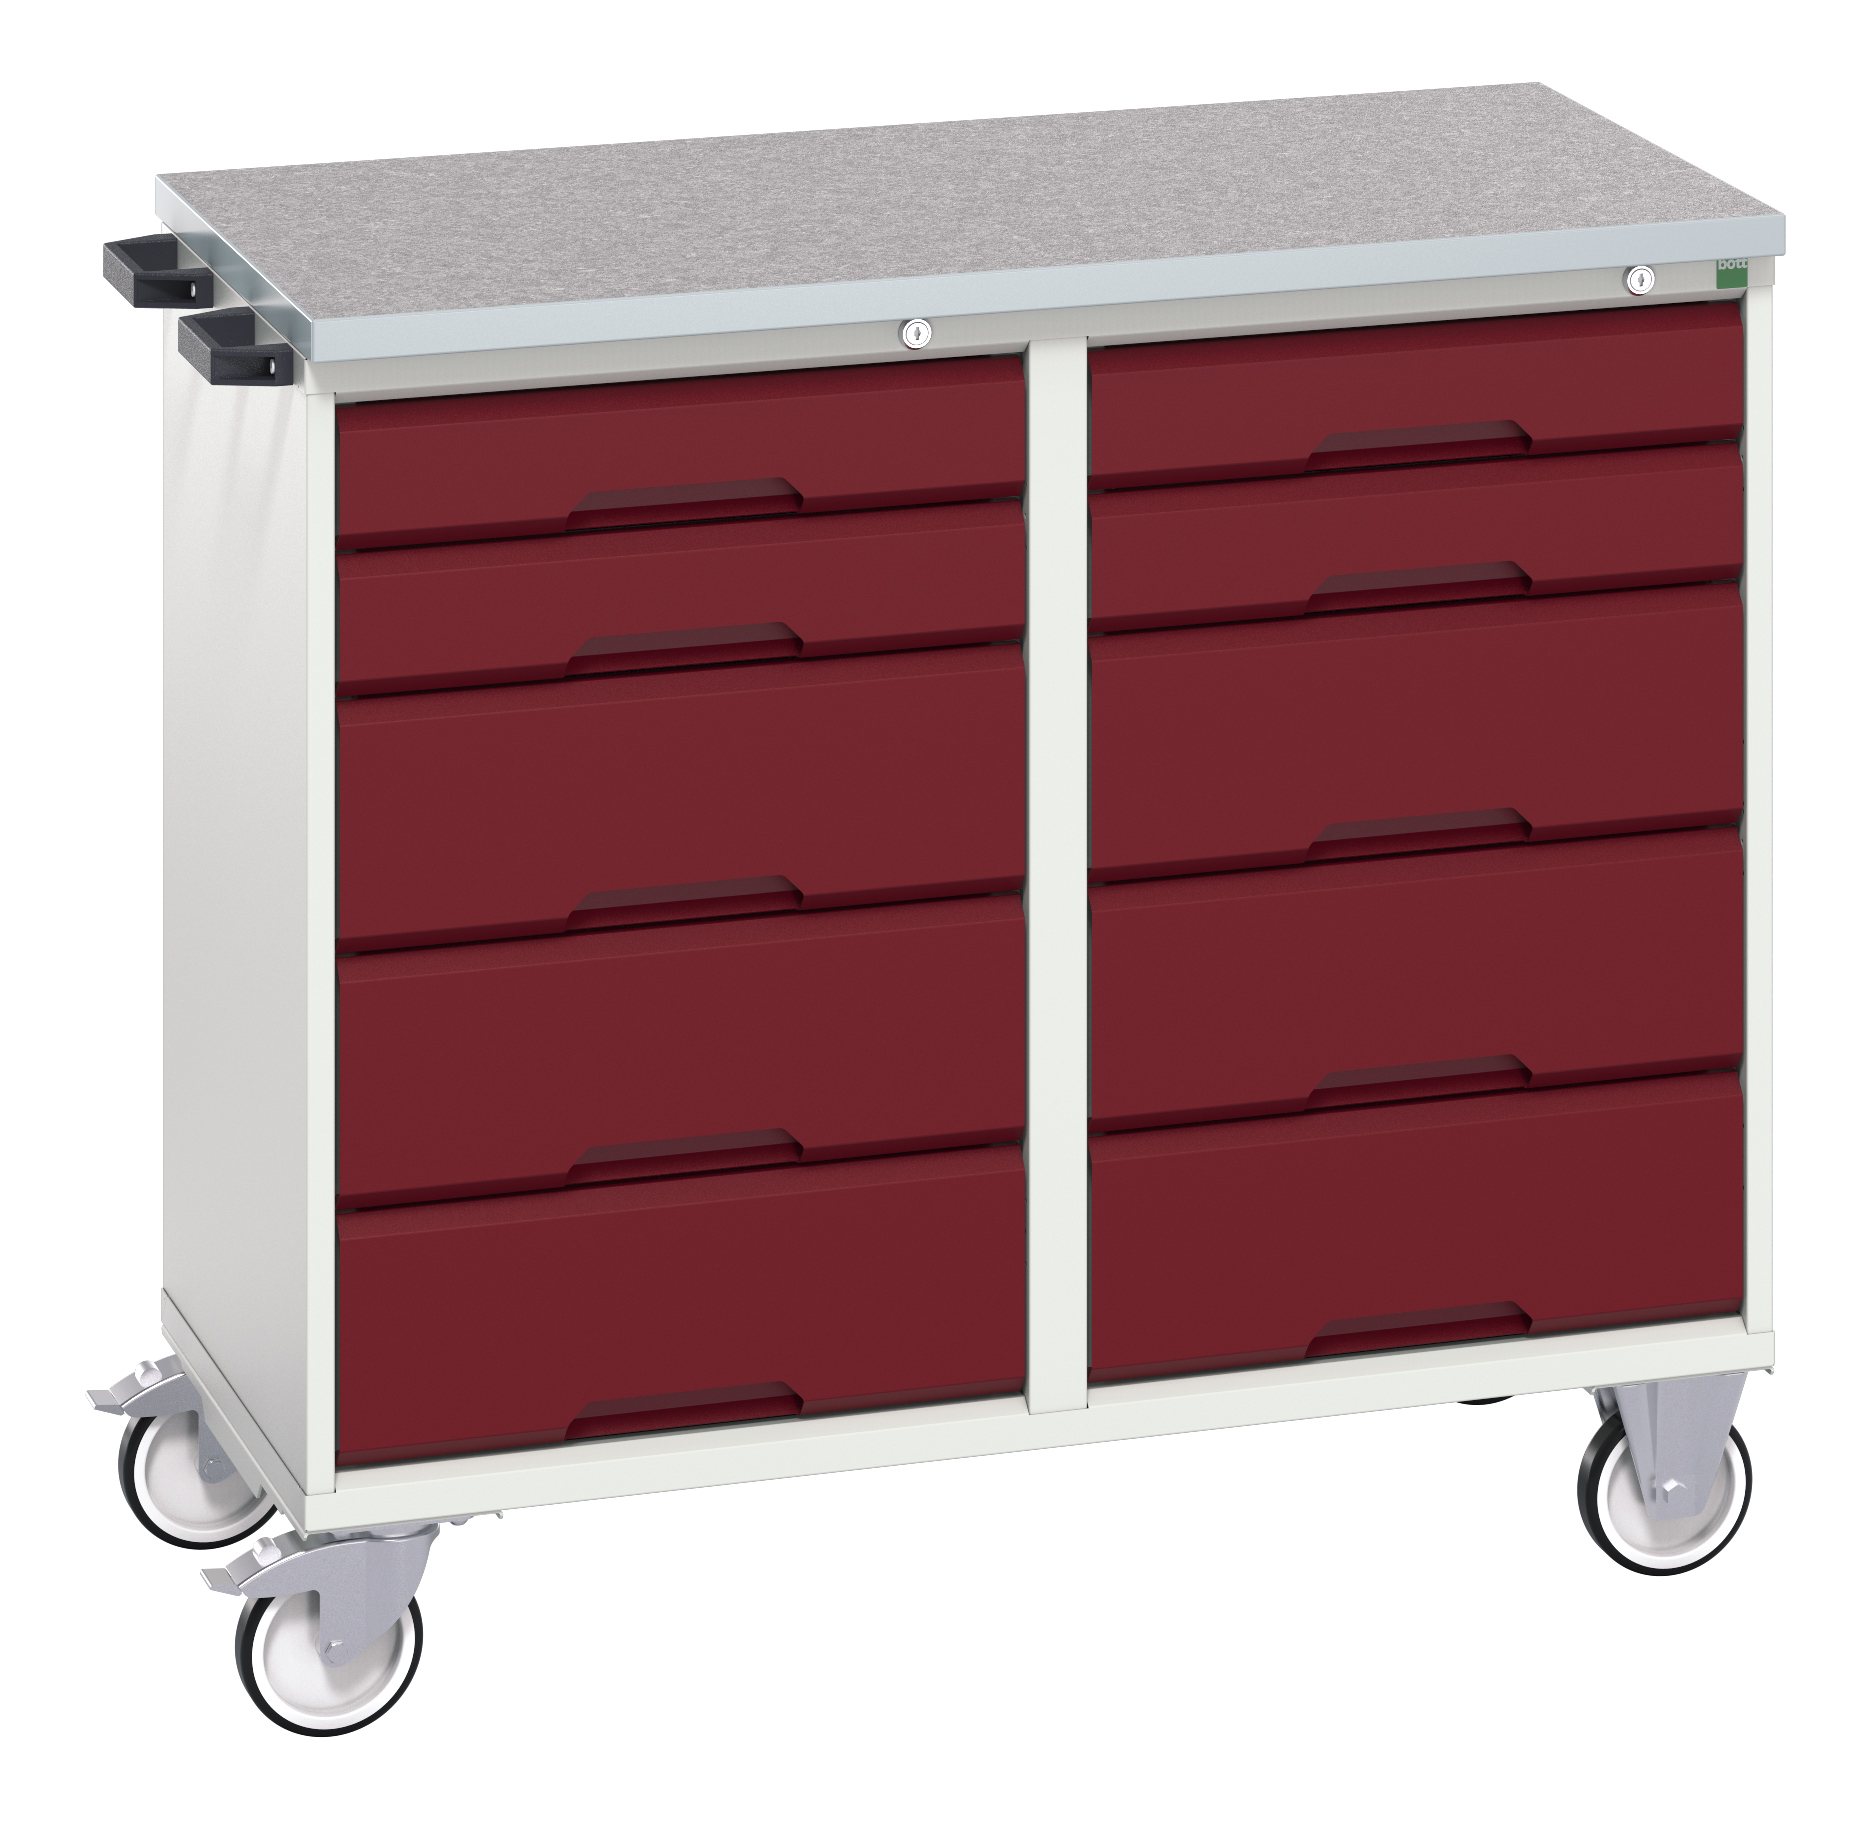 Bott Verso Maintenance Trolley With 10 Drawers & Lino Top - 16927100.24